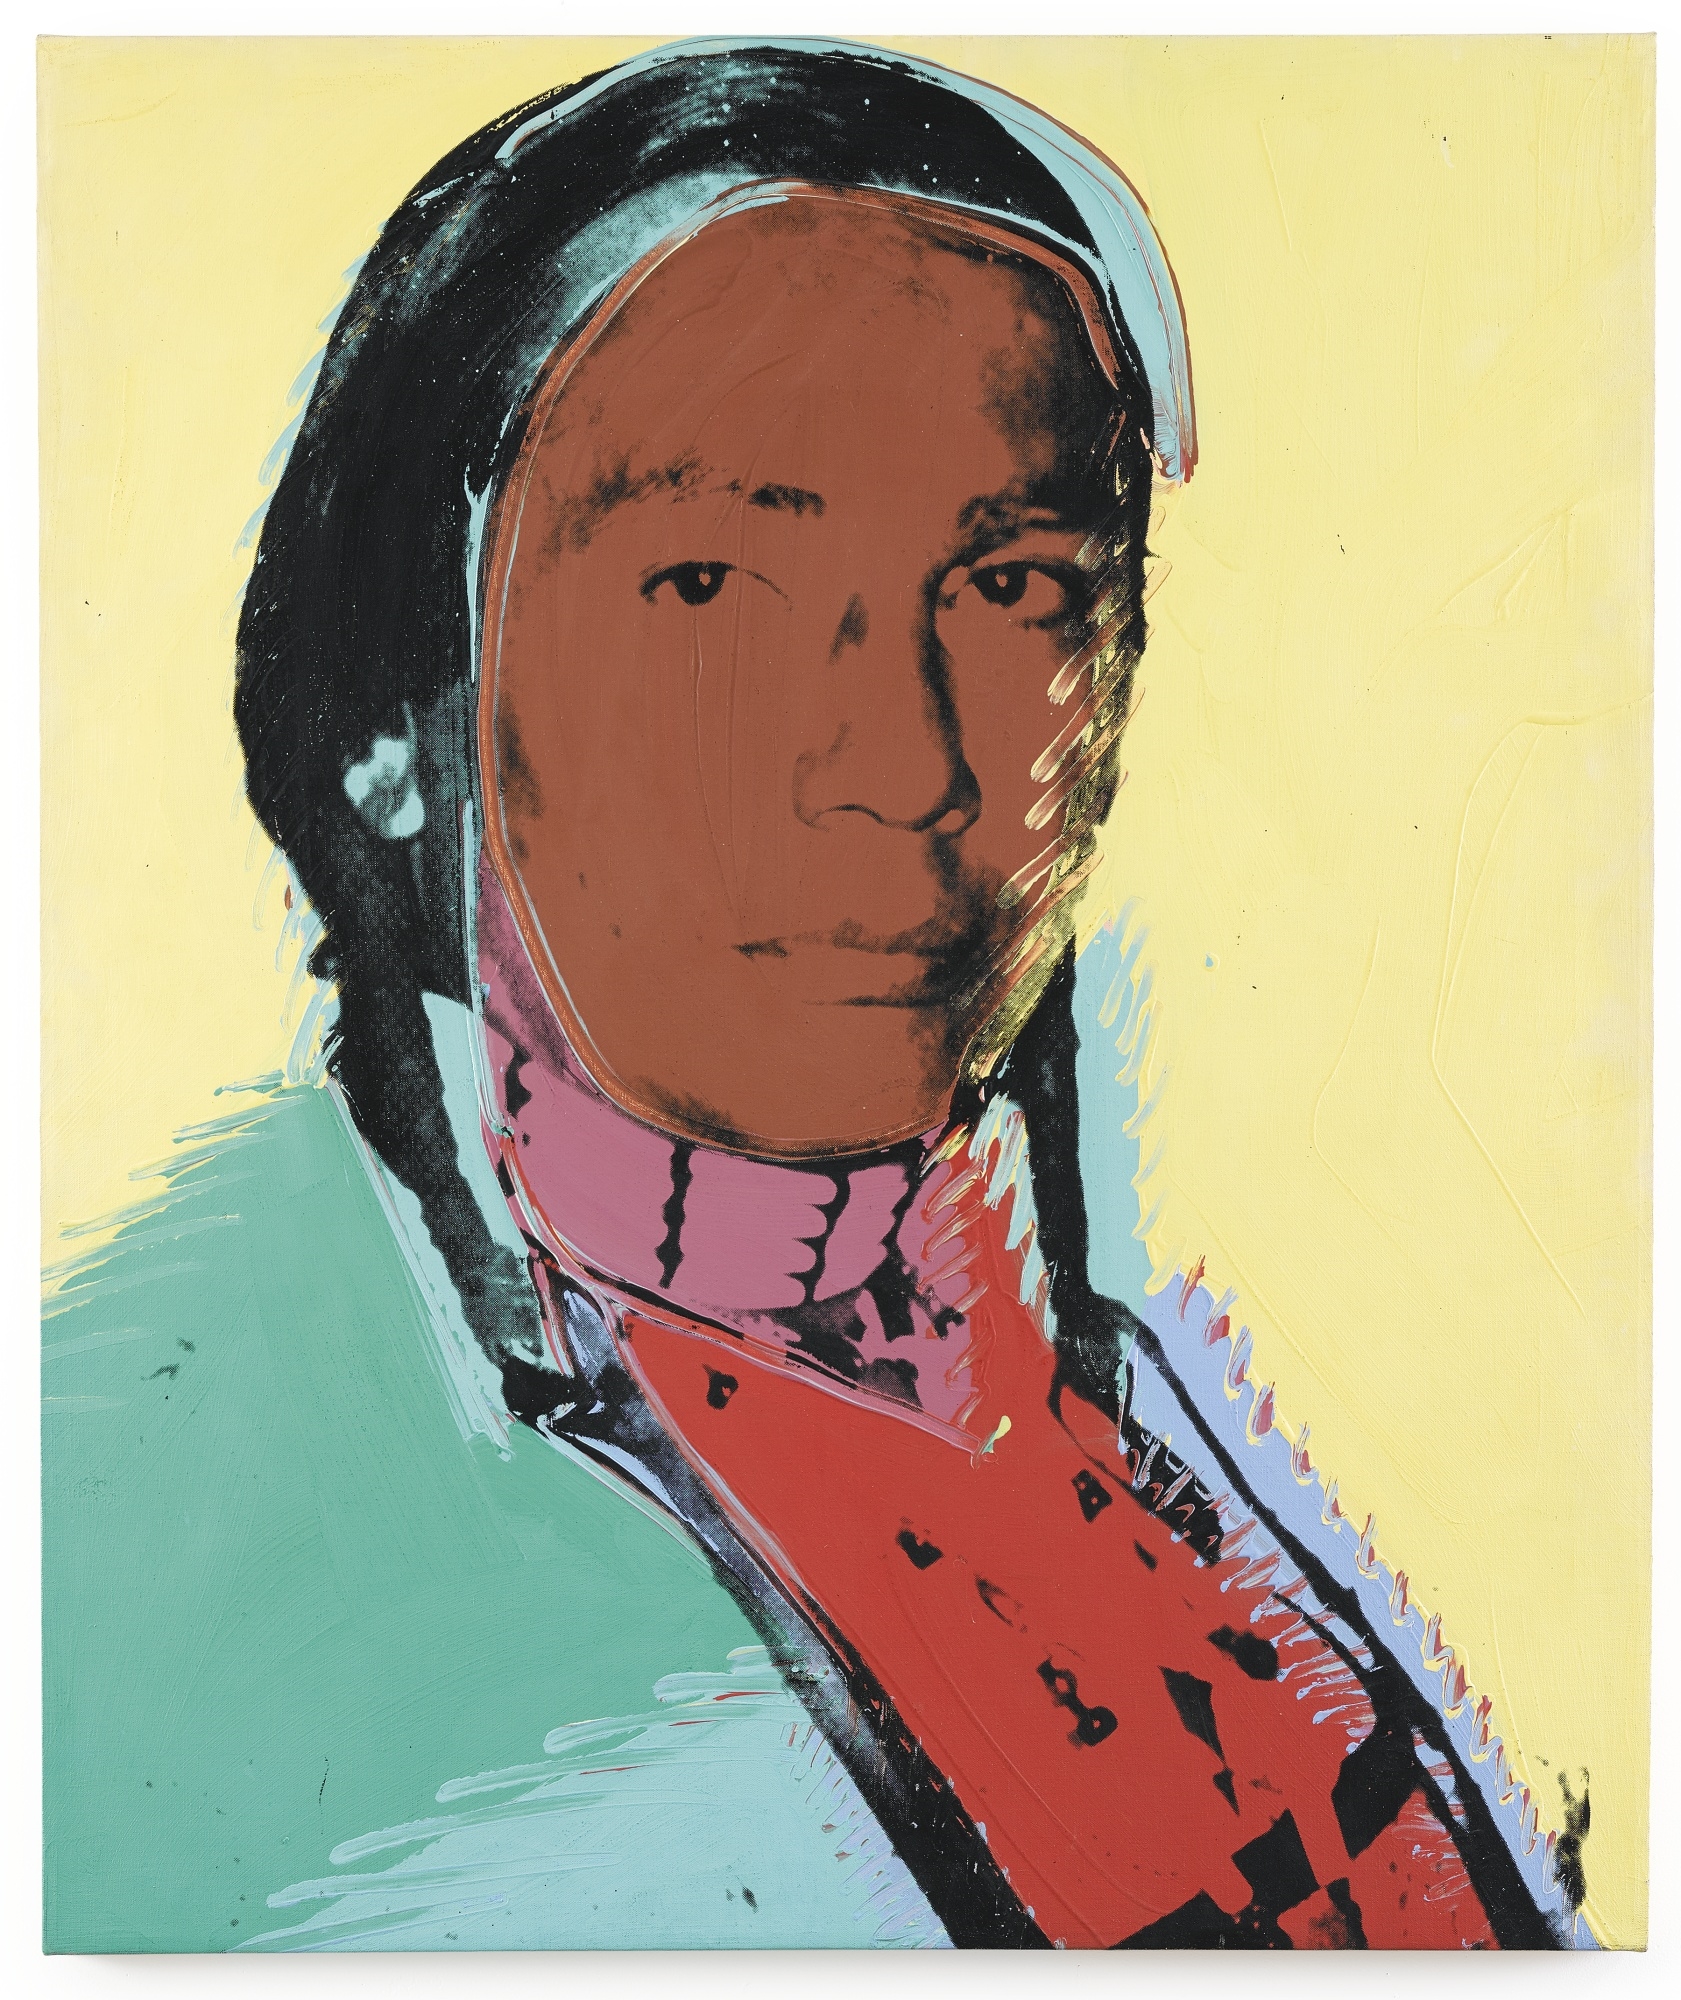 THE AMERICAN INDIAN (RUSSELL MEANS) by Andy Warhol, 1977